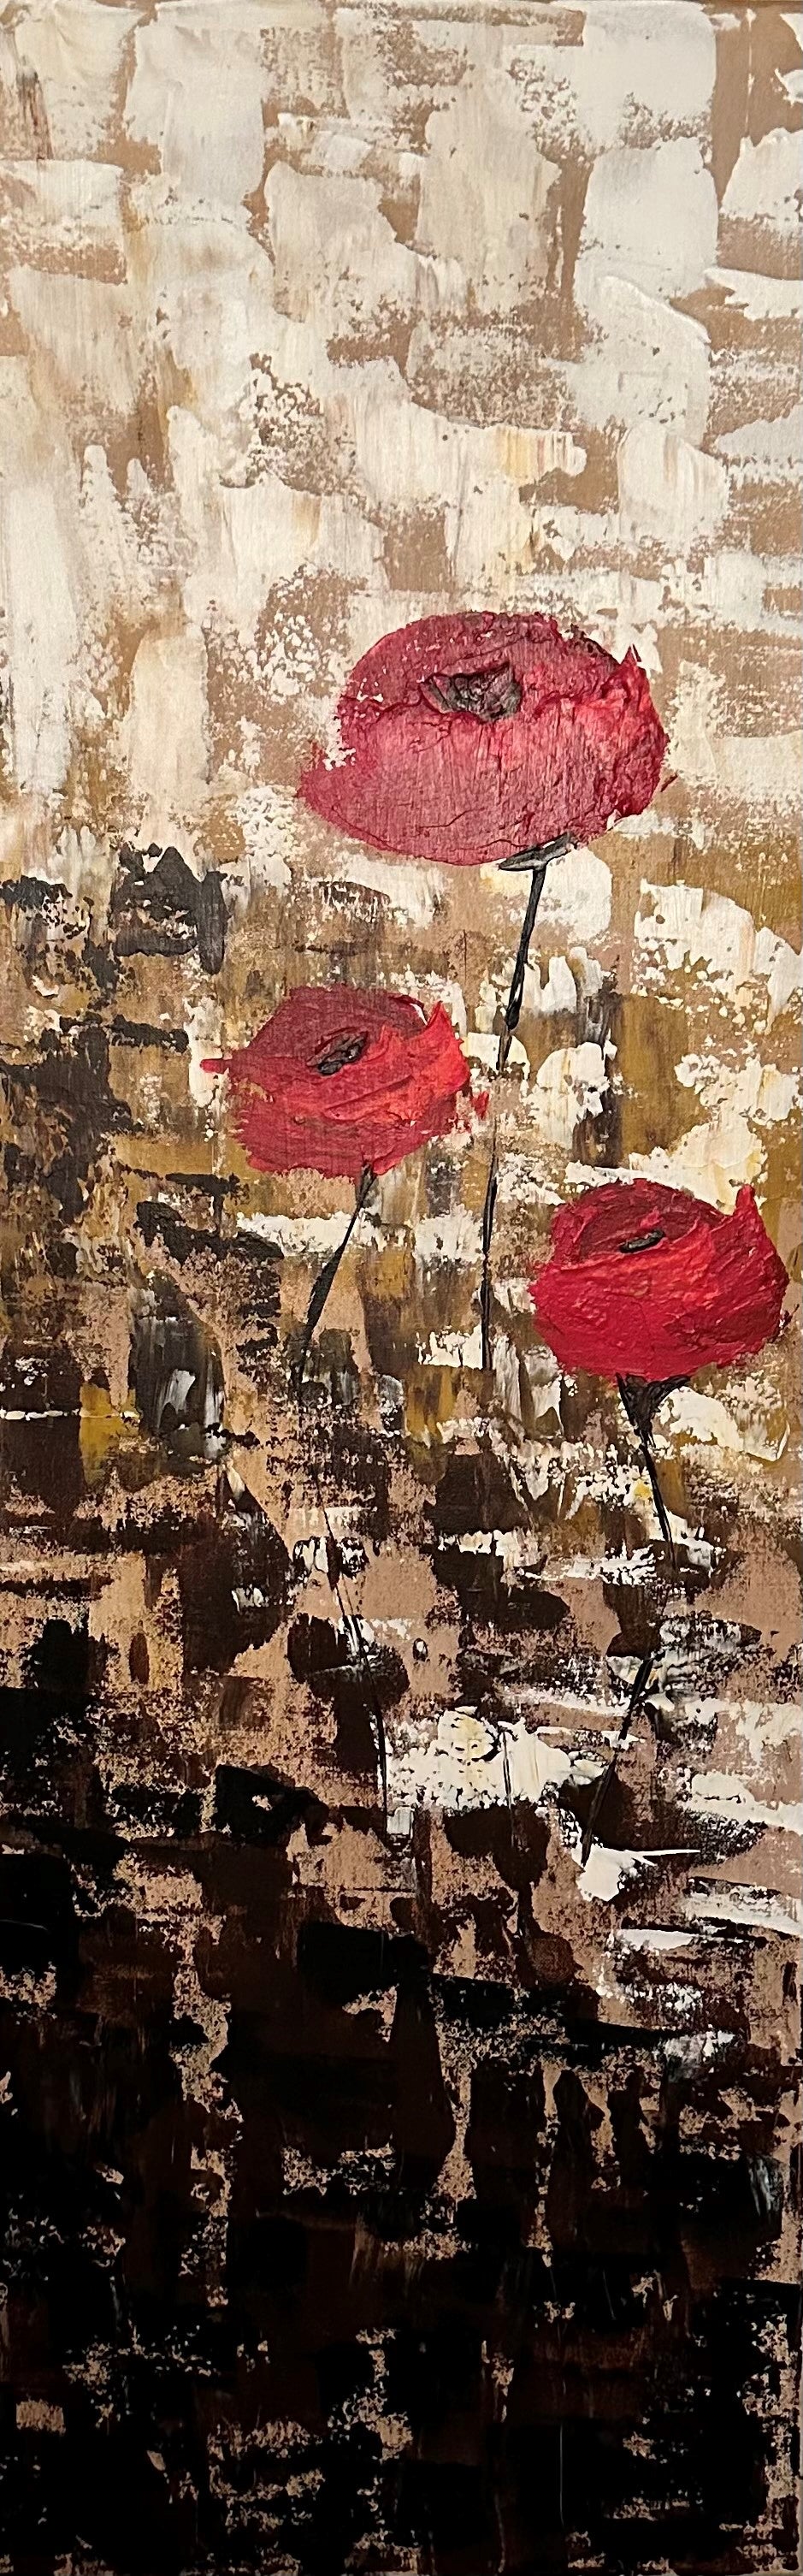 Calm poppies, Original acrylic painting on stretched canvas